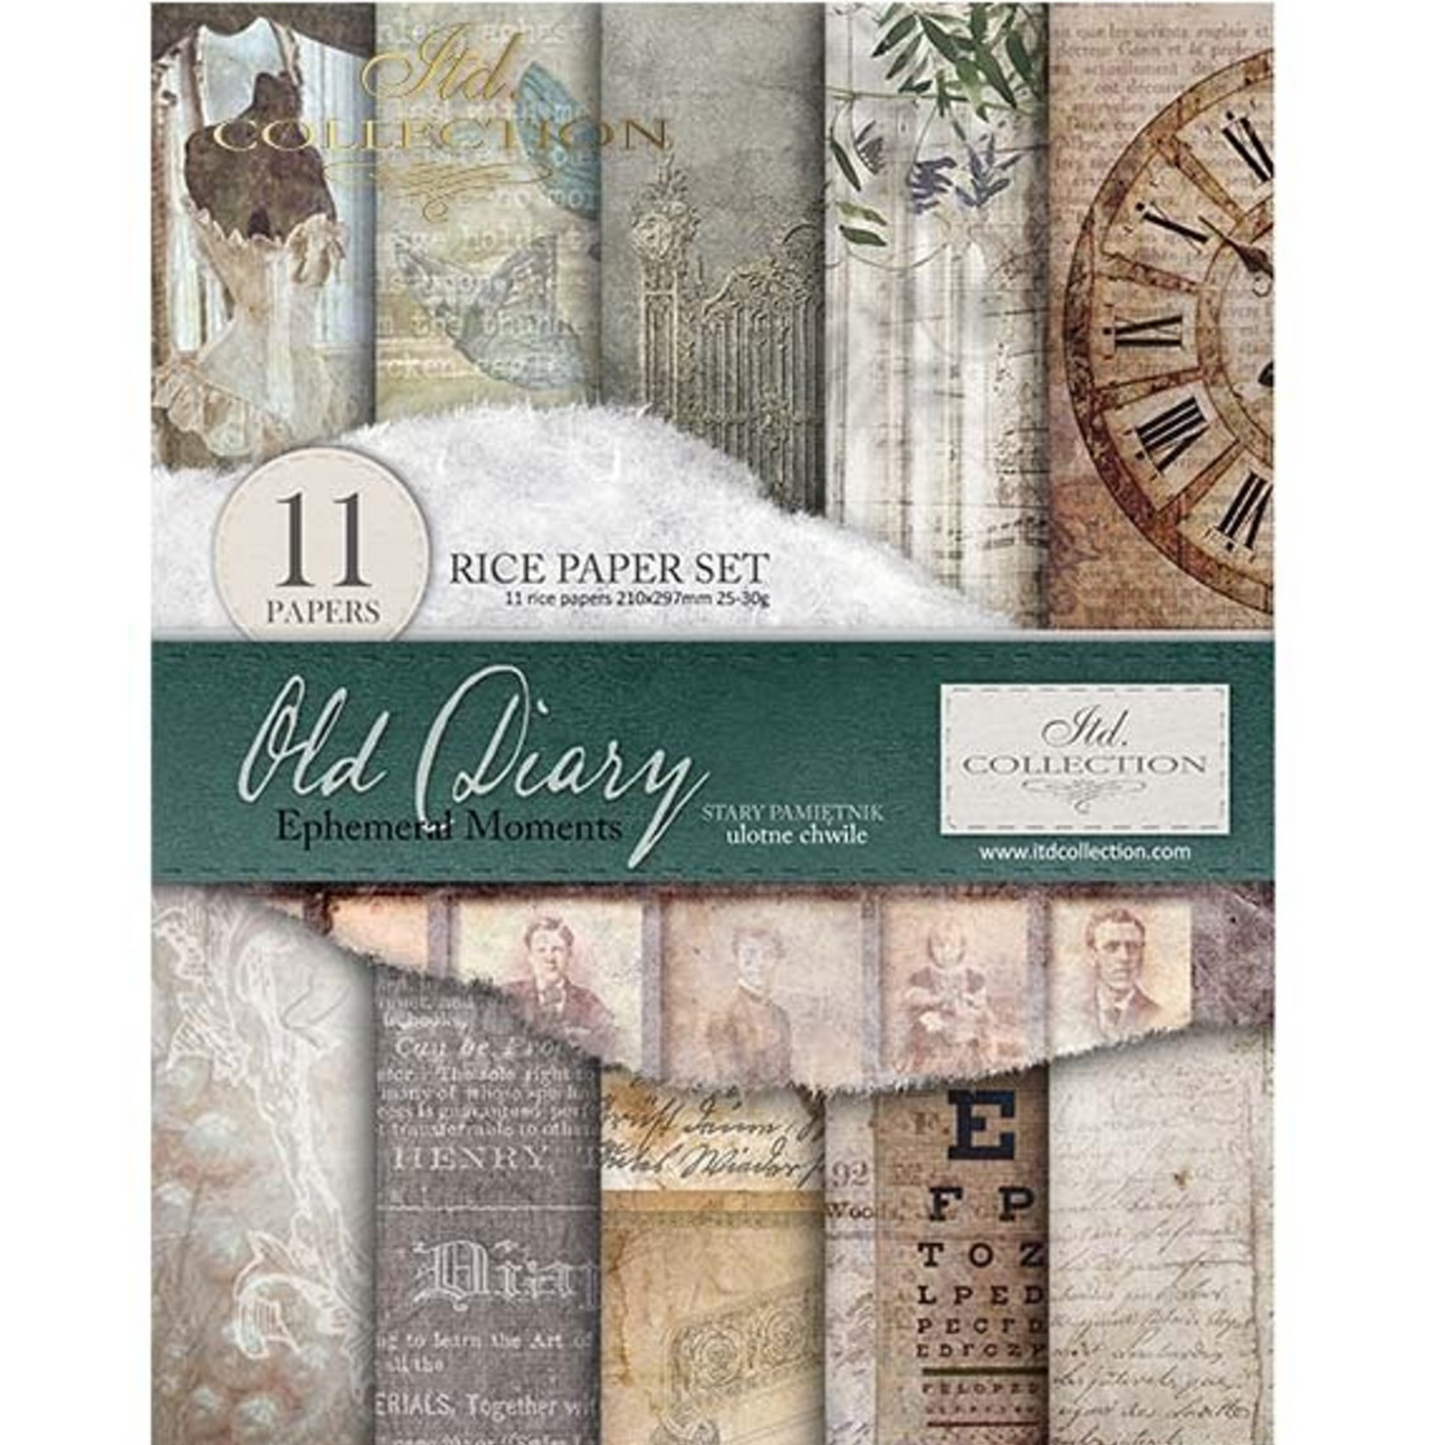 Old Diary Ephemeral Moments-decoupage rice paper set by ITD Collection.  Includes 11 sheets of Size A4 rice paper. Front cover photo.  Avaliable at Milton's Daughter.